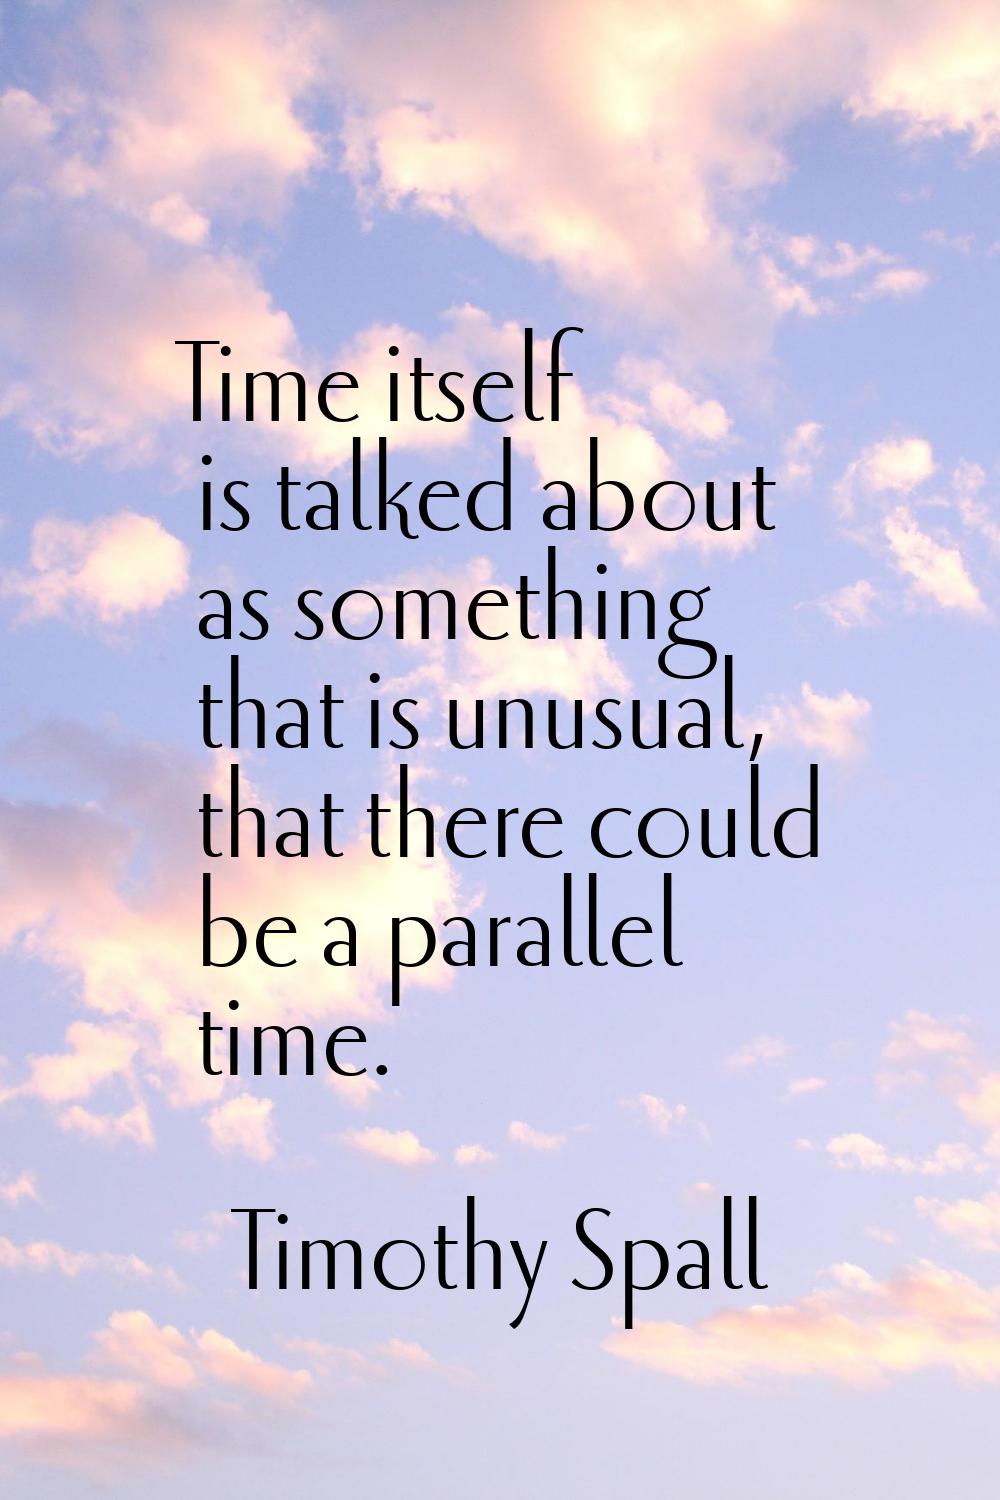 Time itself is talked about as something that is unusual, that there could be a parallel time.